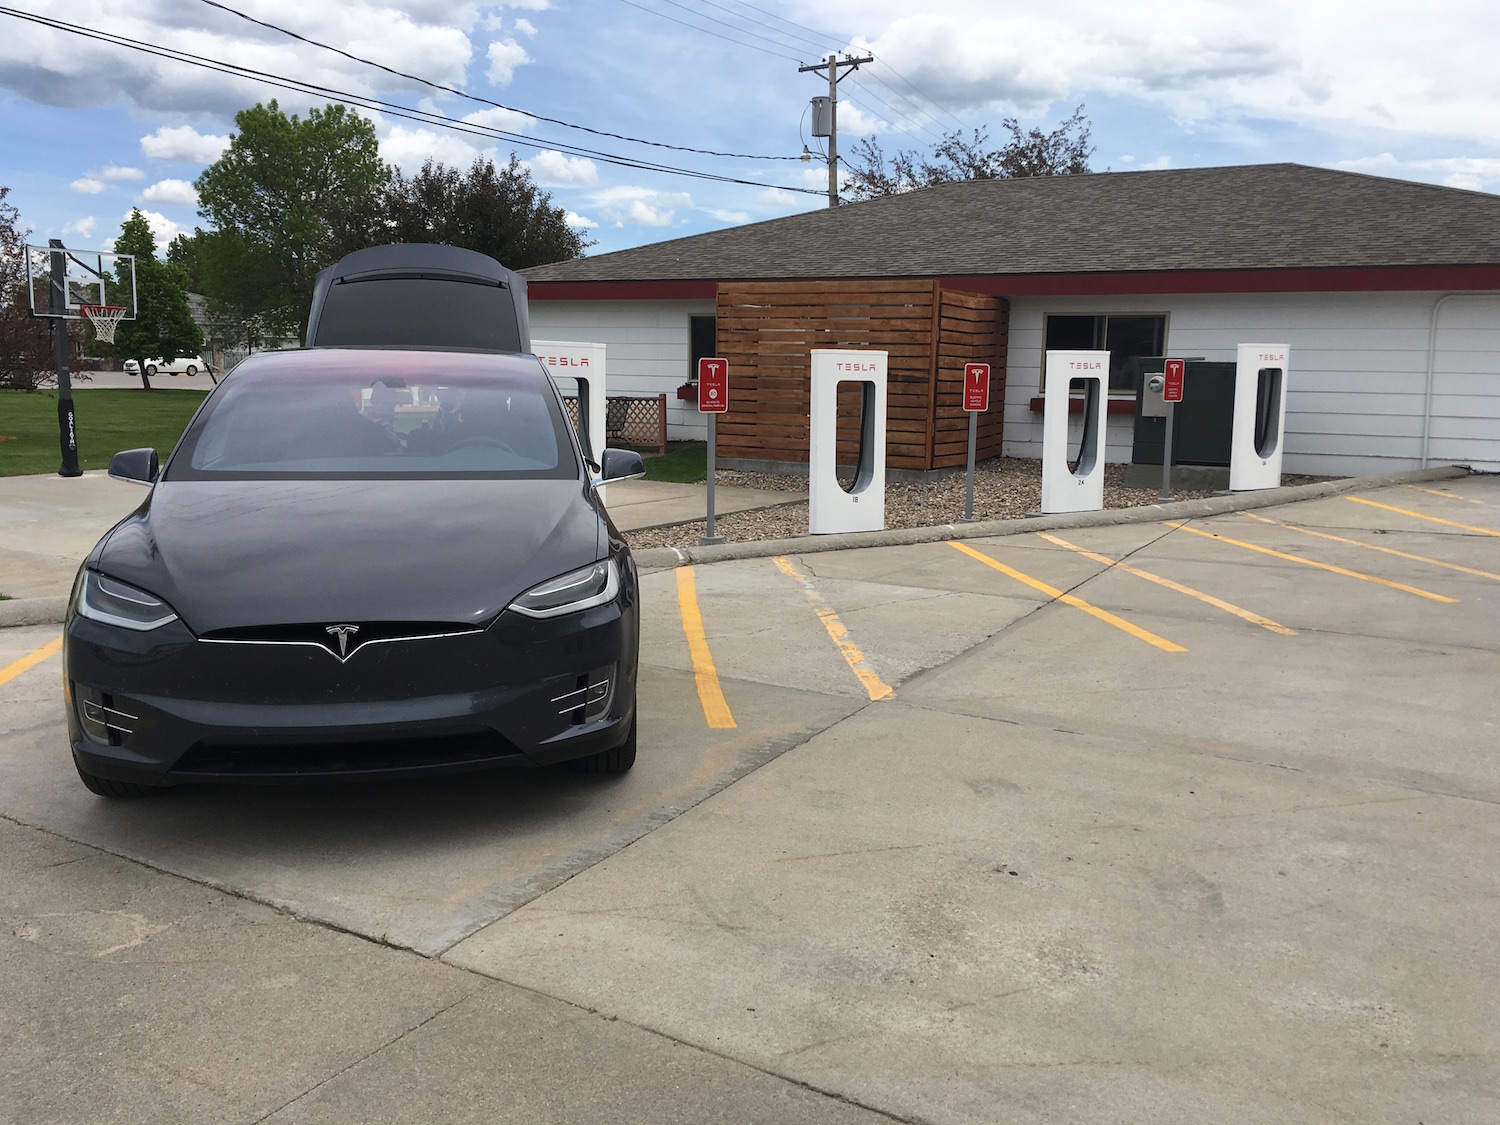 Lusk WY Supercharger.jpg